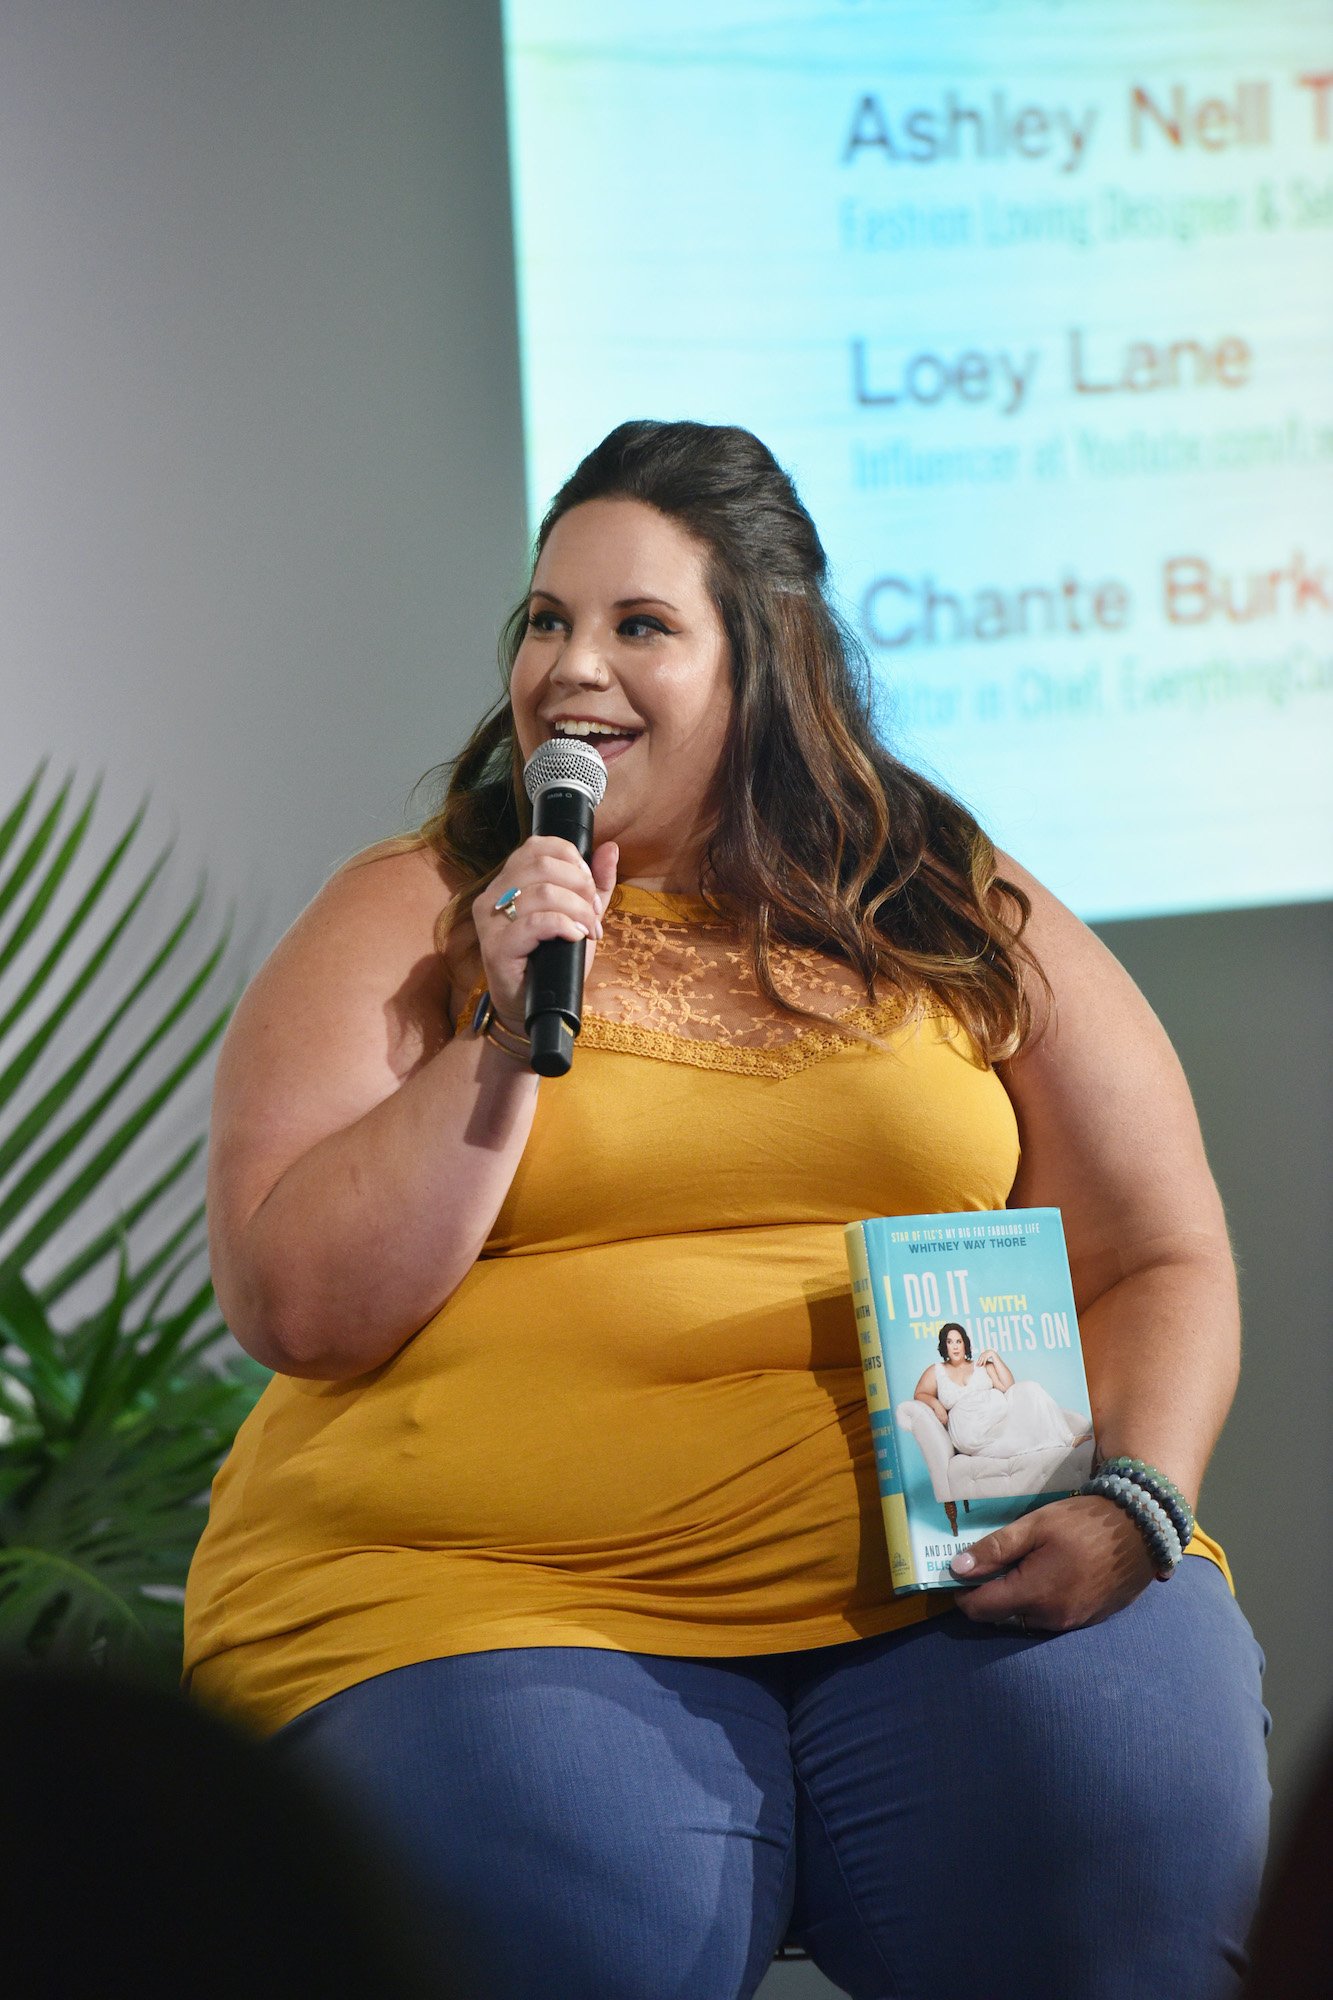 ‘My Big Fat Fabulous Life’: Why Did Whitney Way Thore and Lennie Alehat Break Up?